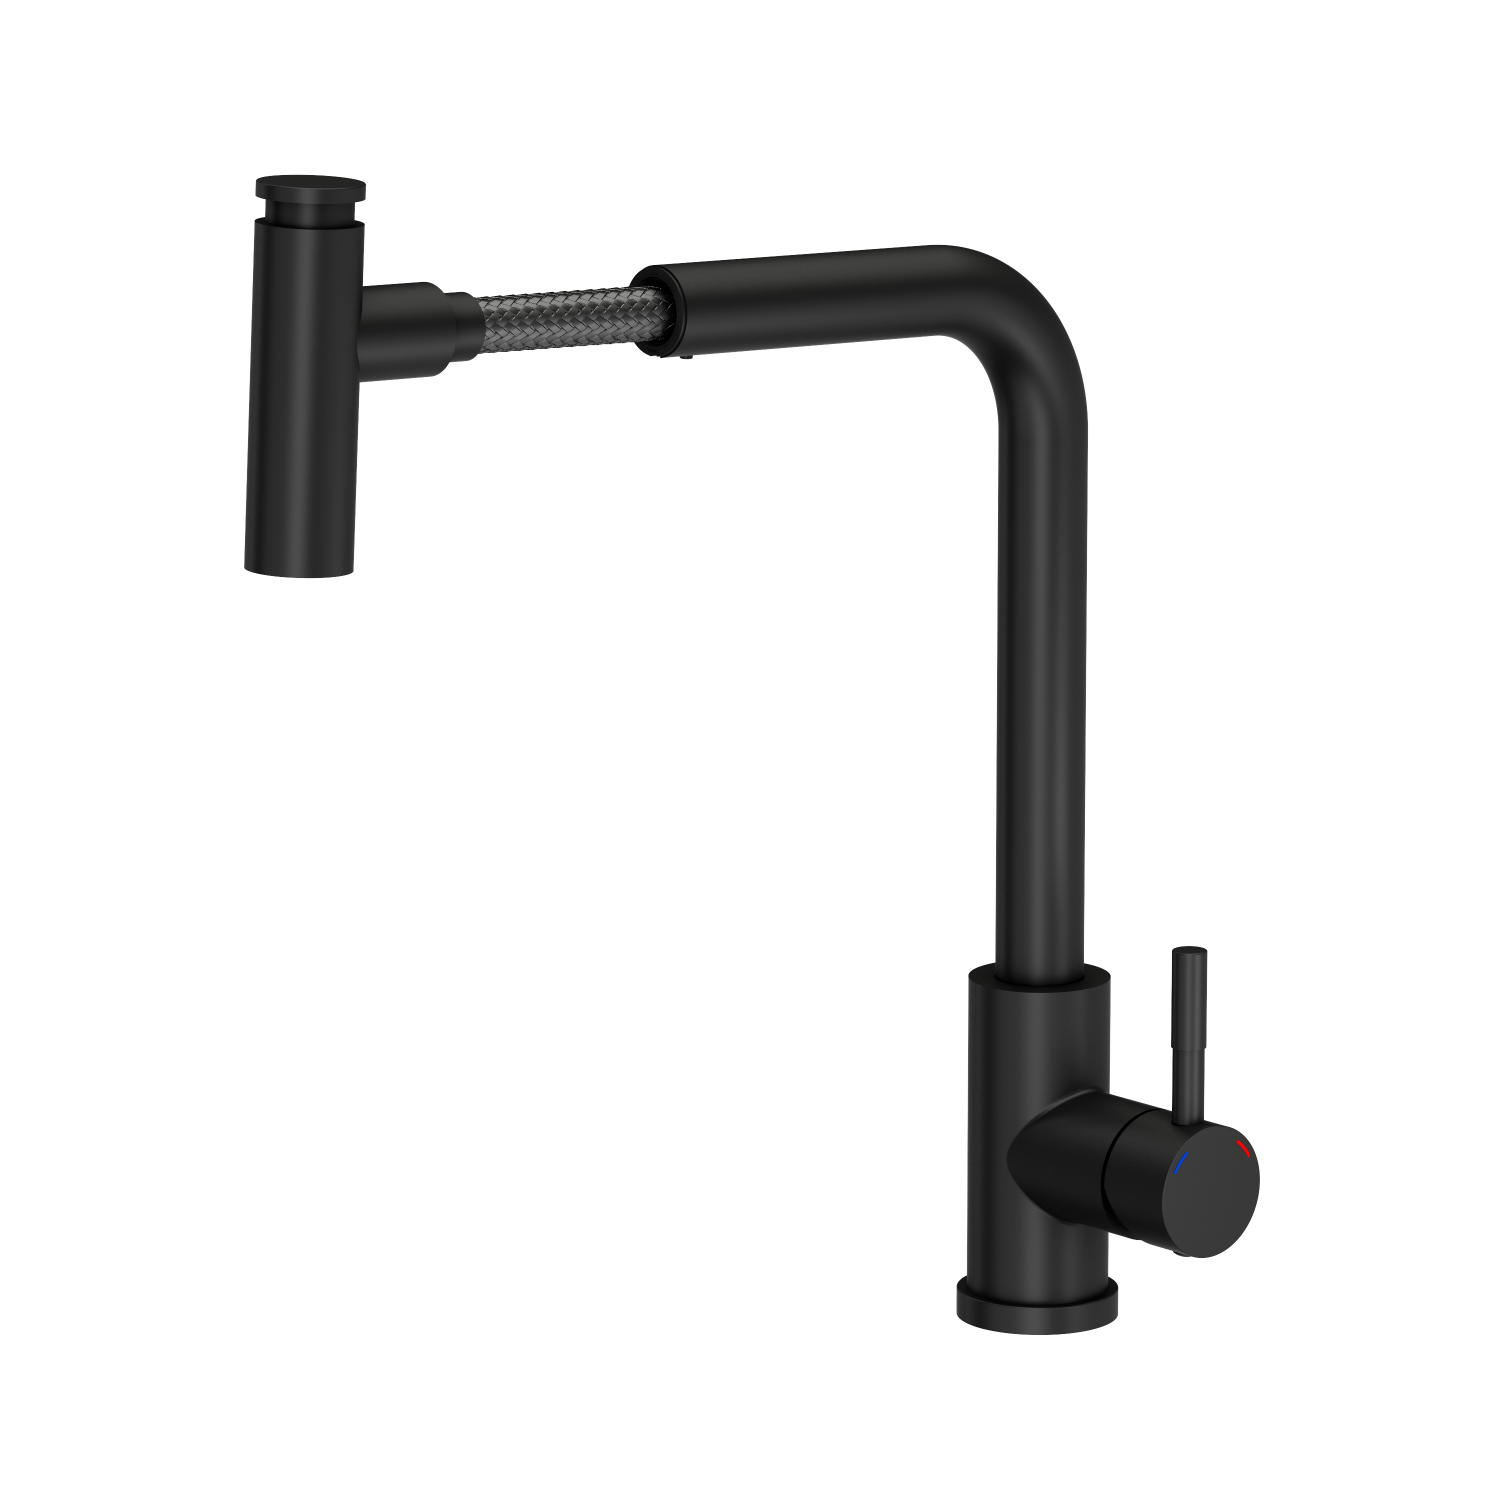 Quadron Meryl pull our tap with spray function, Matte Black